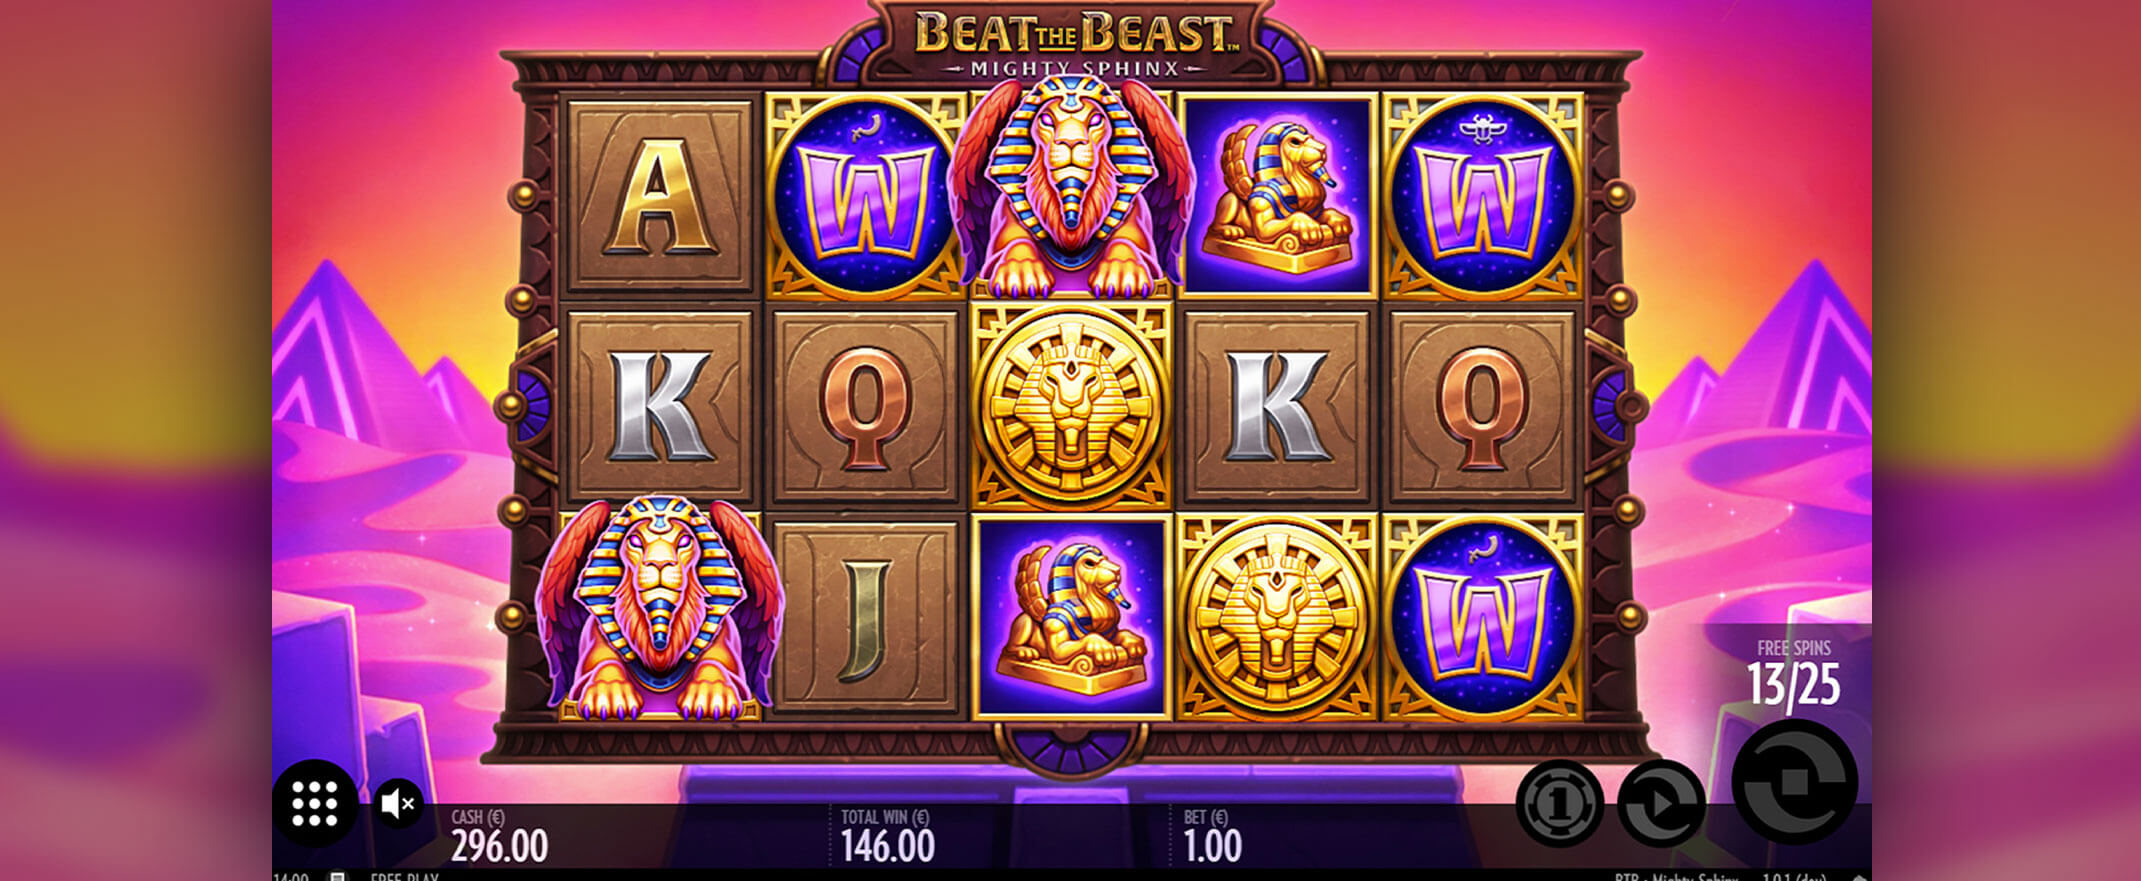 Beat The Beast Might Sphinx video slot